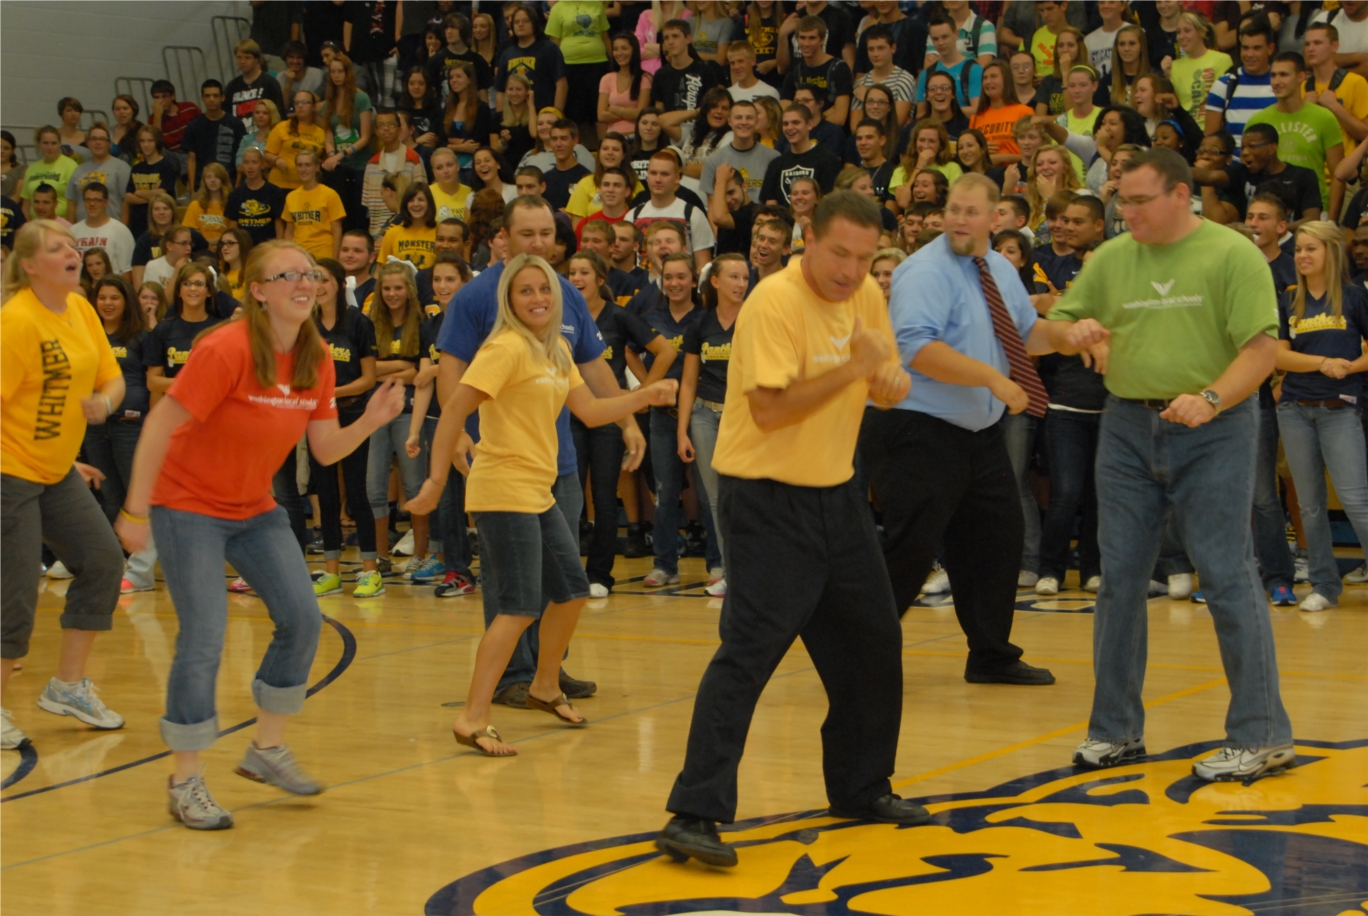 Superintendent Hickey and high school staff members are active participants in the pep rallies at Whitmer.  Friendly competition between staff and students is always fun.